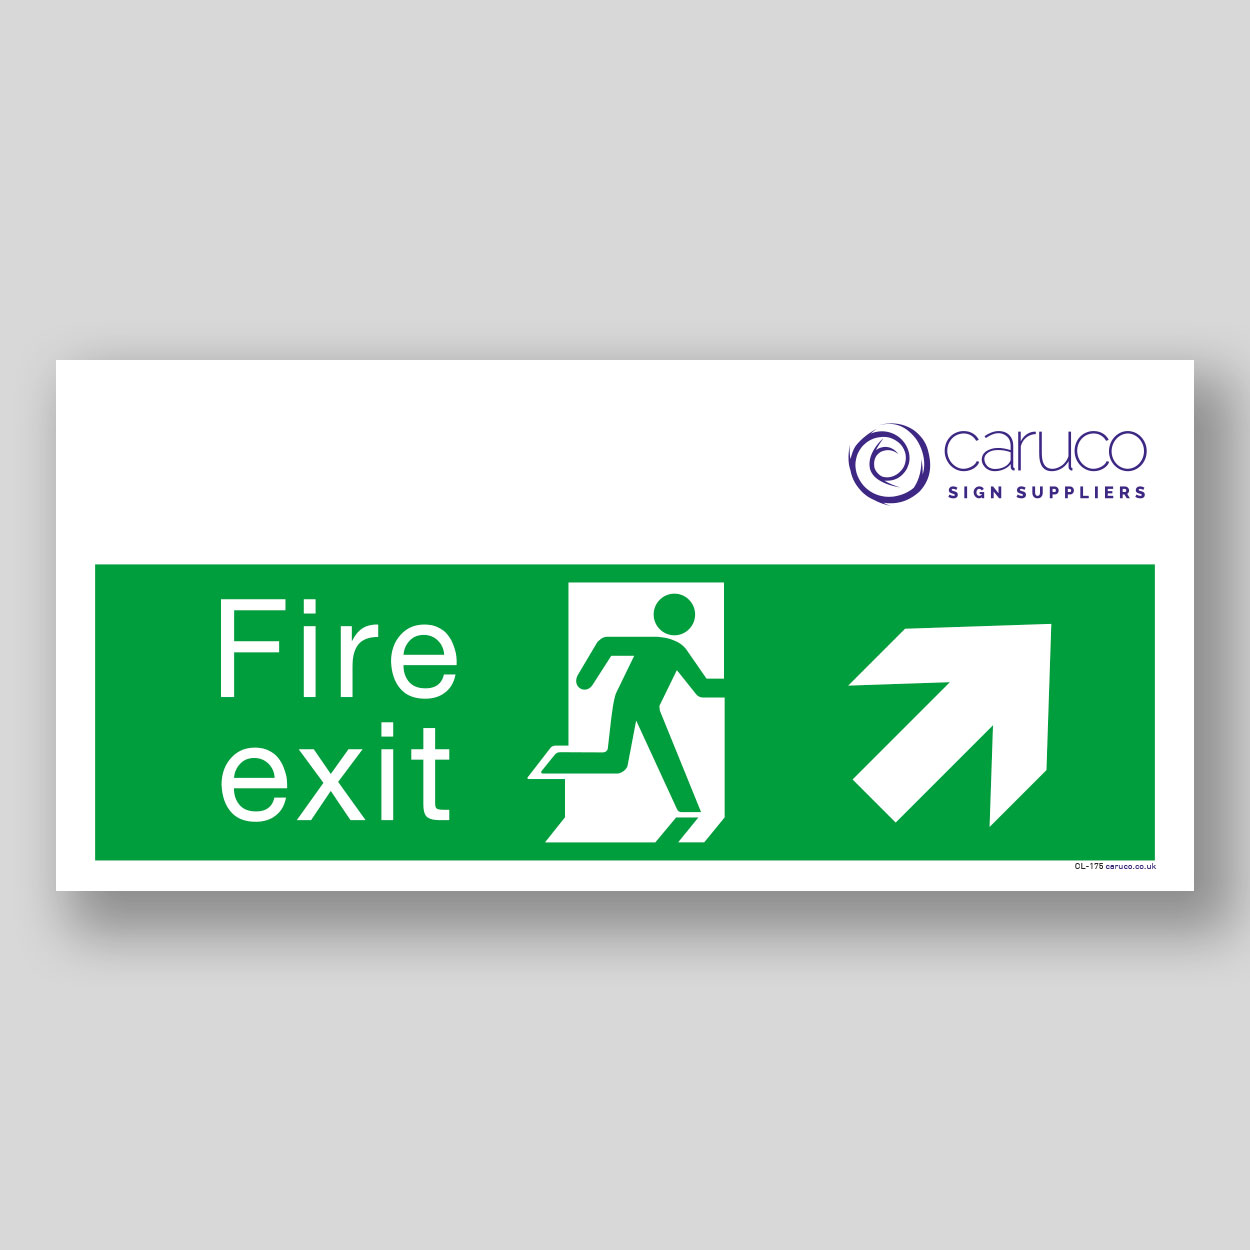 CL-175 Fire exit - with right forward arrow